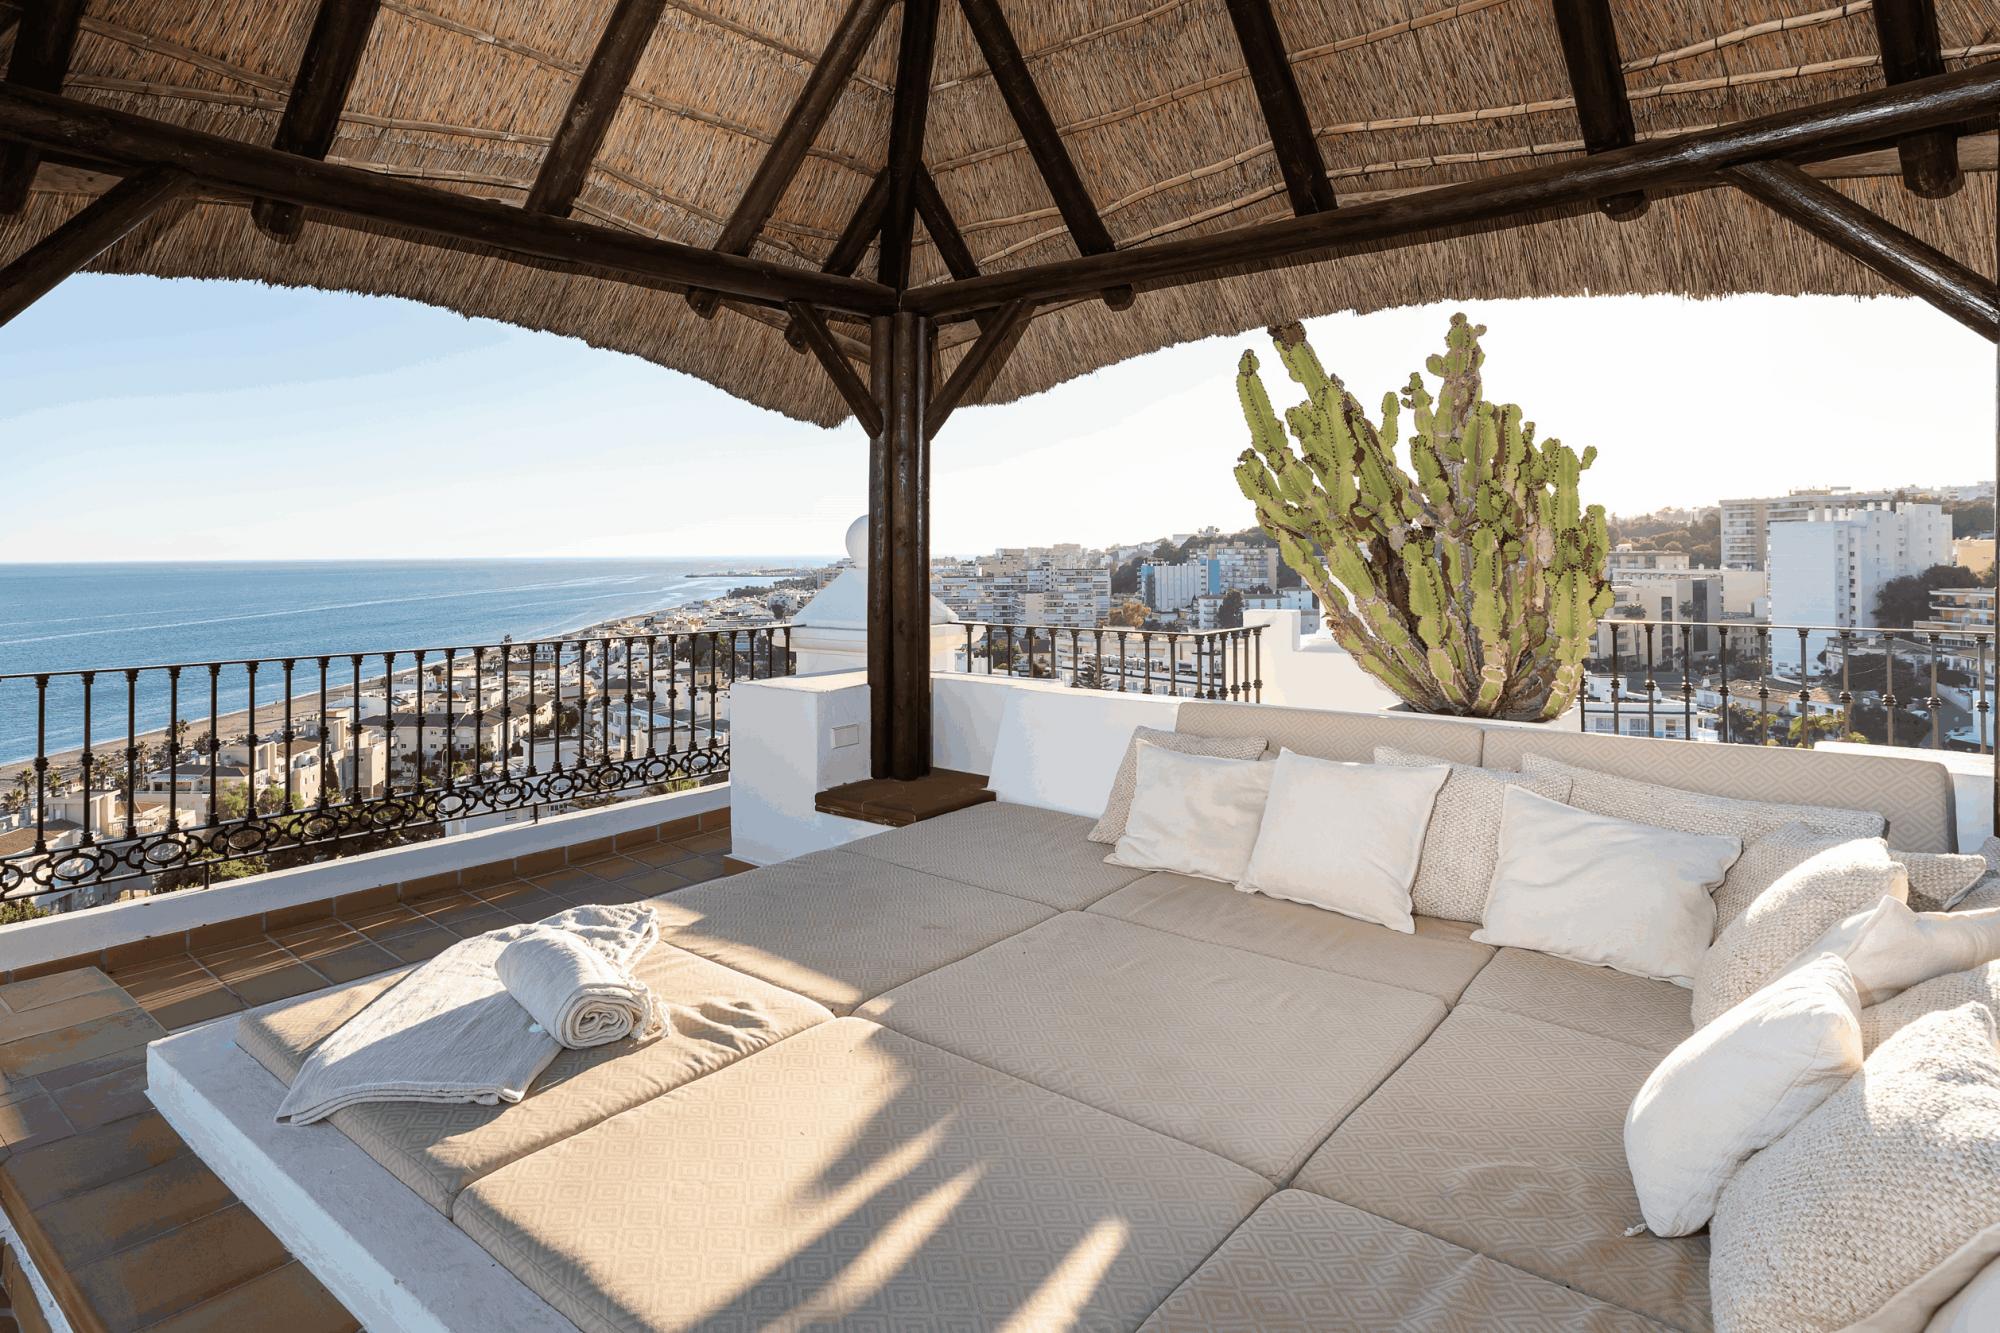 Property Image 2 - Upscale Clifftop Villa with Magnficent View of the Sea
